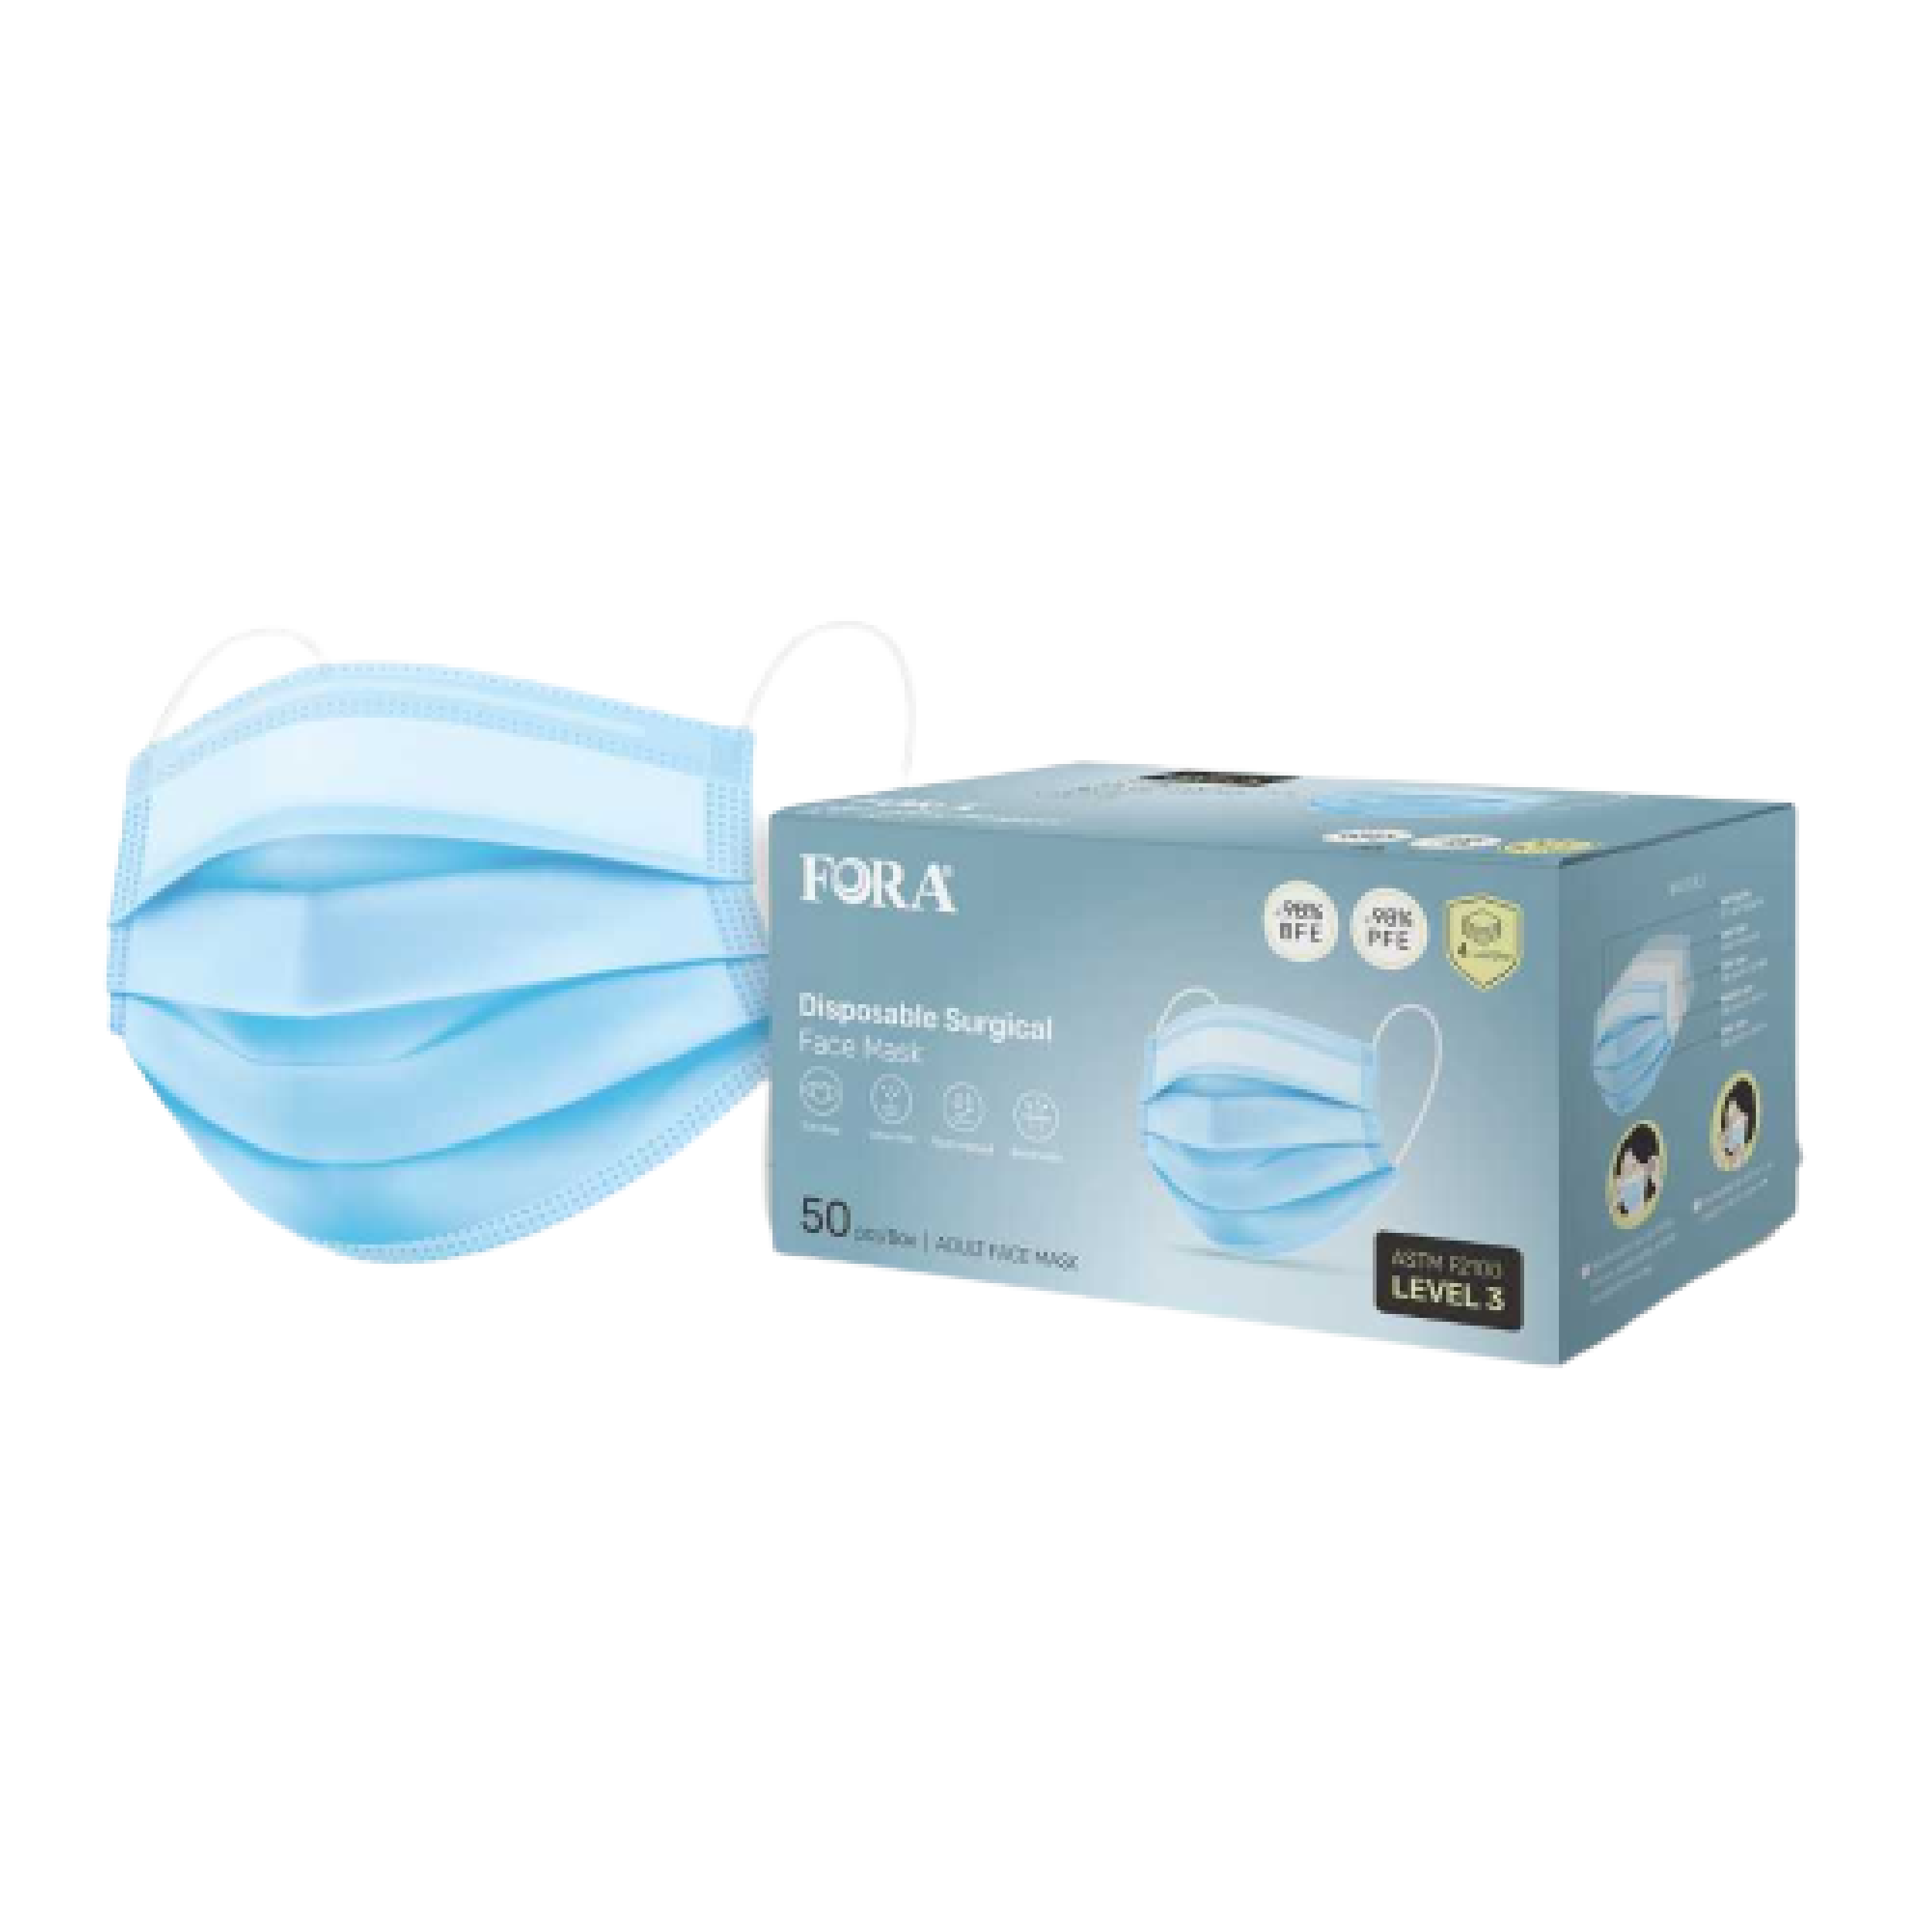 FORA 4-Ply ASTM Level 3 Medical Grade Disposable Mask (50 Pcs/box) Perfect for Surgical and Daily Use